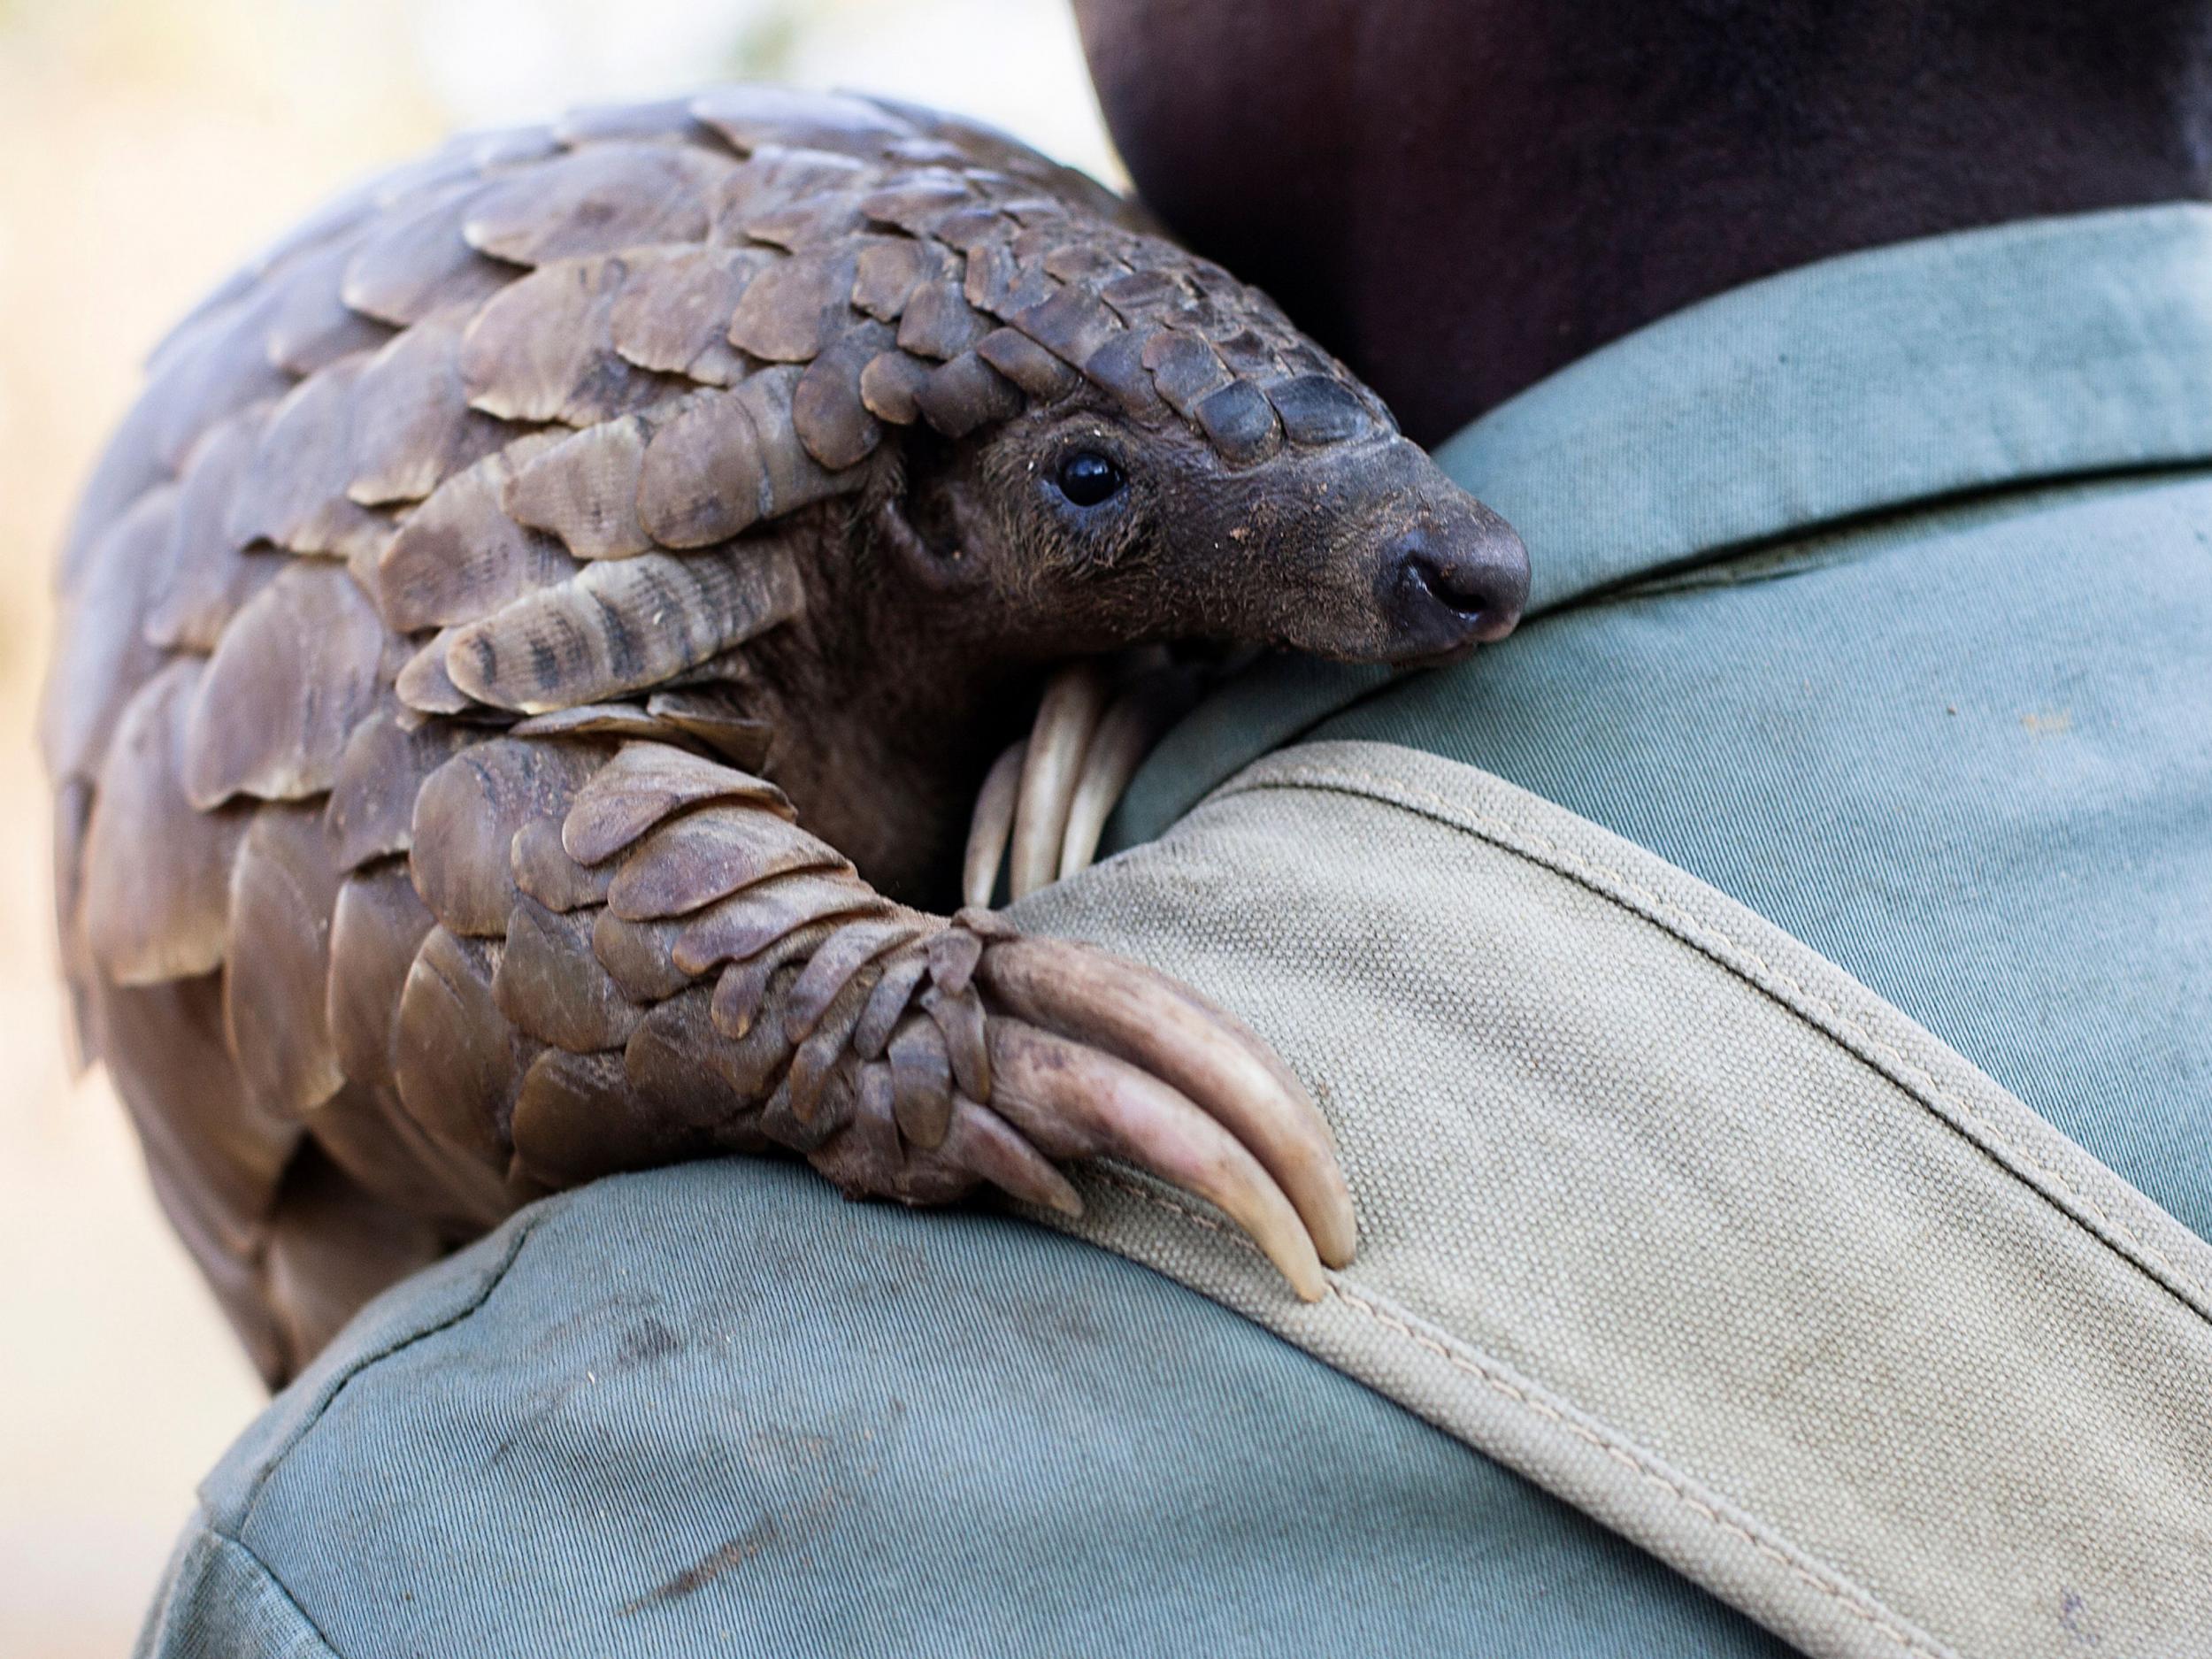 All eight species of pangolin are threatened by poaching, due to the demand for their scales and meat